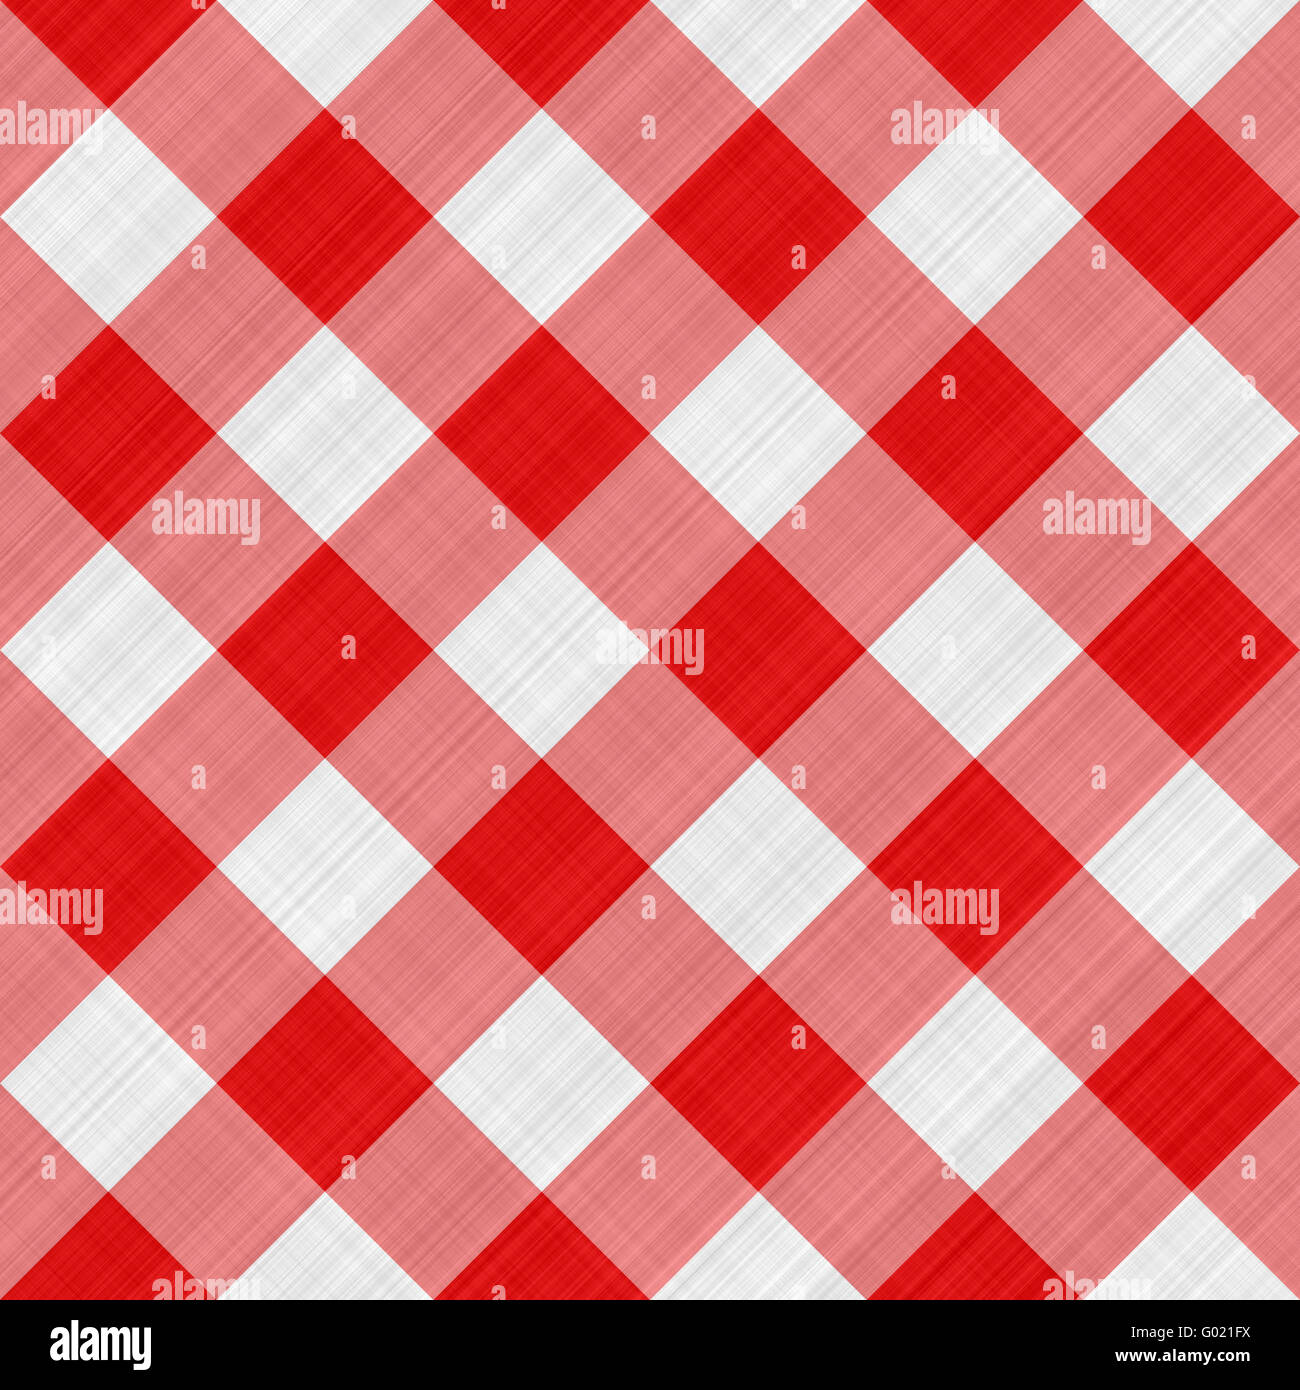 seamless texture of red and white blocked tartan cloth Stock Photo